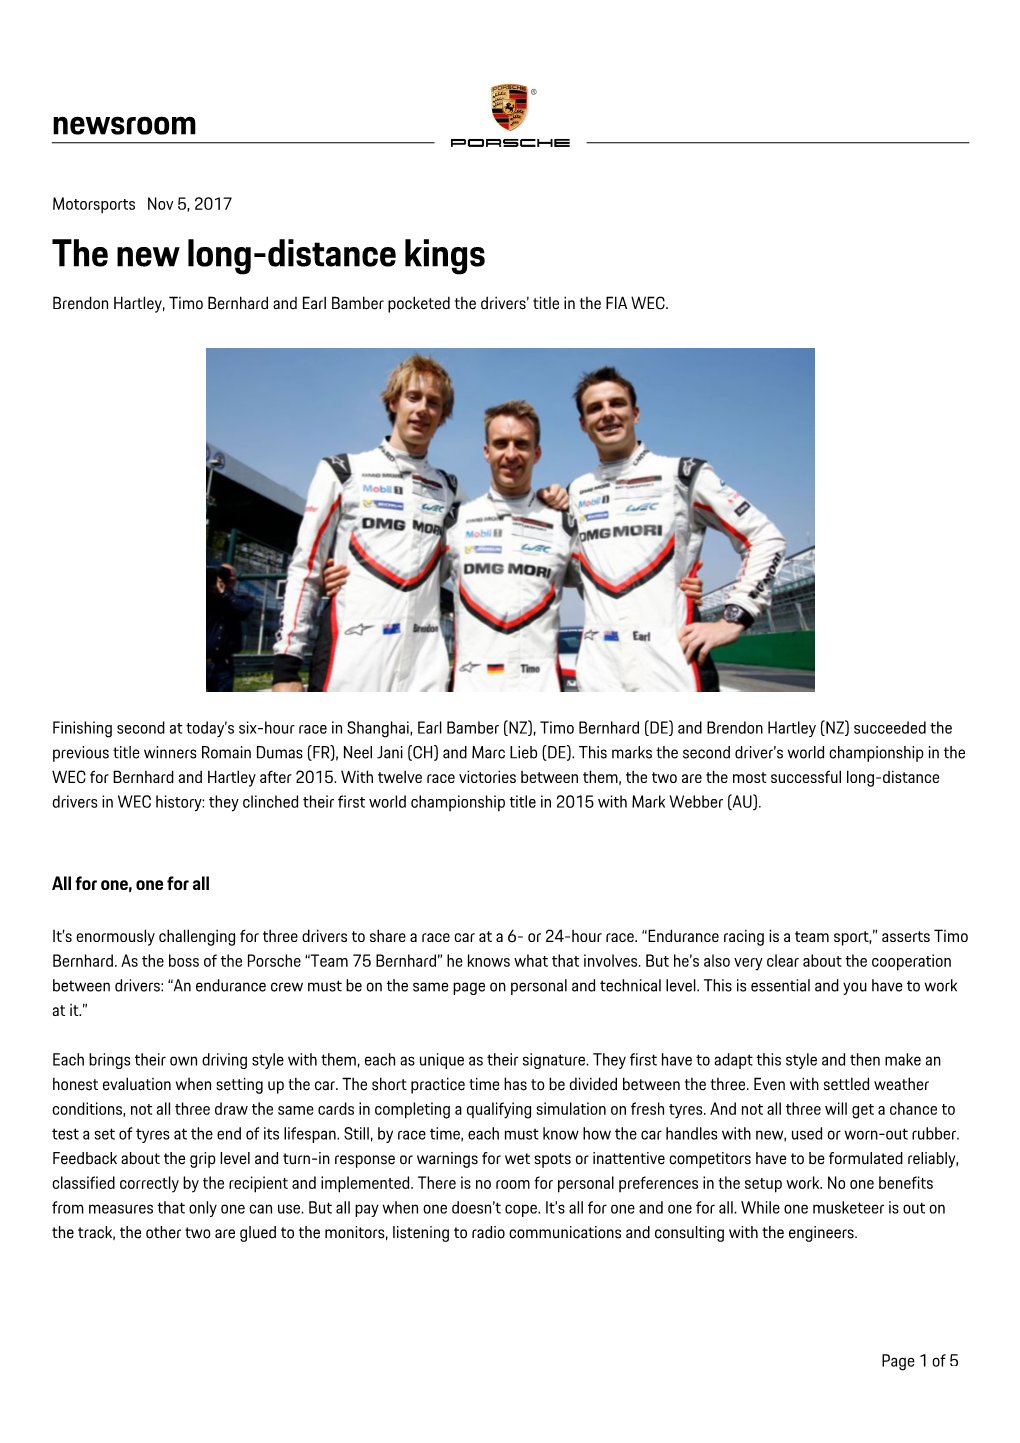 The New Long-Distance Kings Brendon Hartley, Timo Bernhard and Earl Bamber Pocketed the Drivers’ Title in the FIA WEC